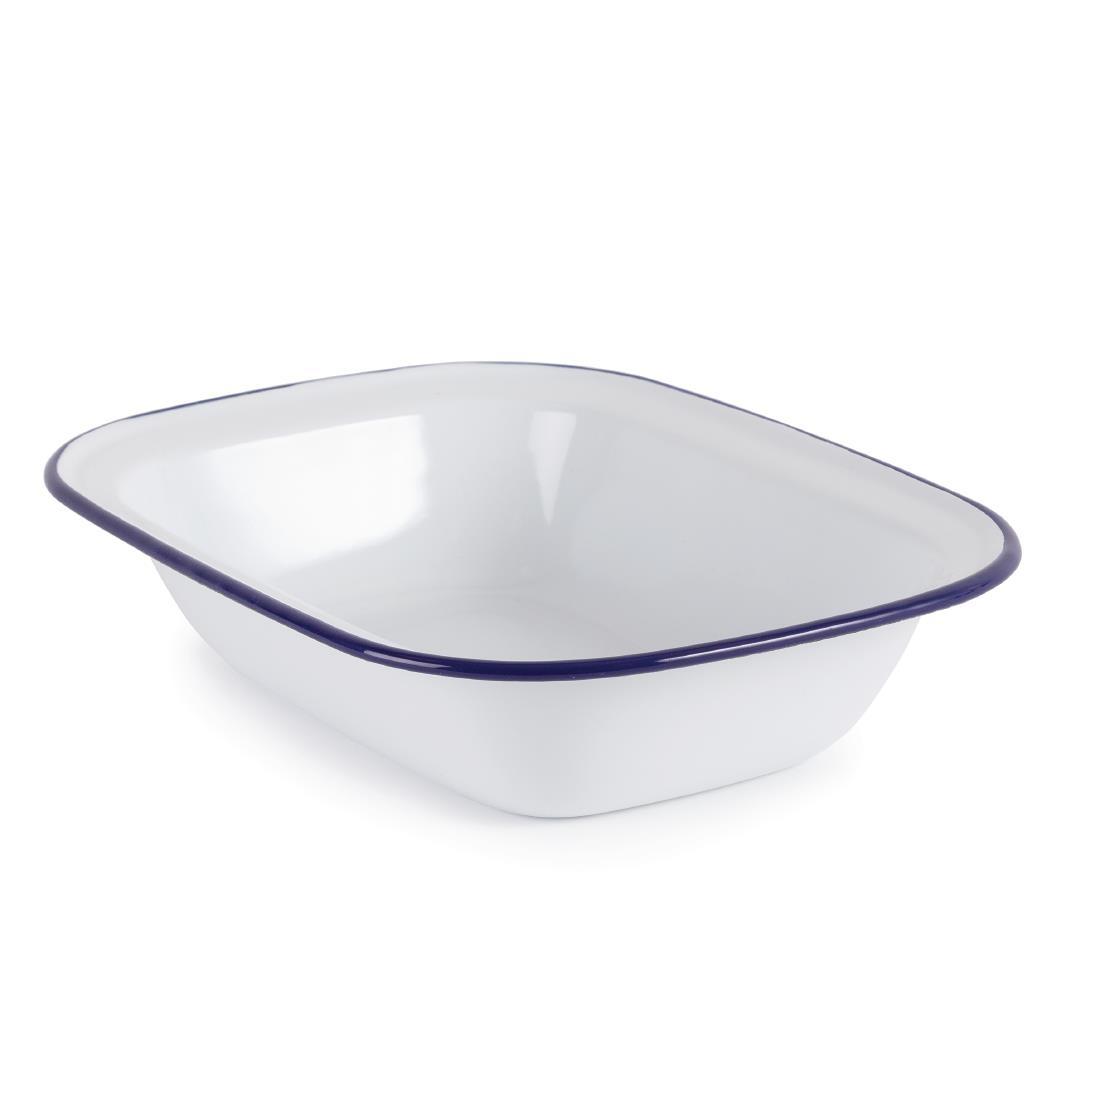 Olympia Enamel Dishes Rectangular 280 x 190mm (Pack of 6) - GM510  - 6